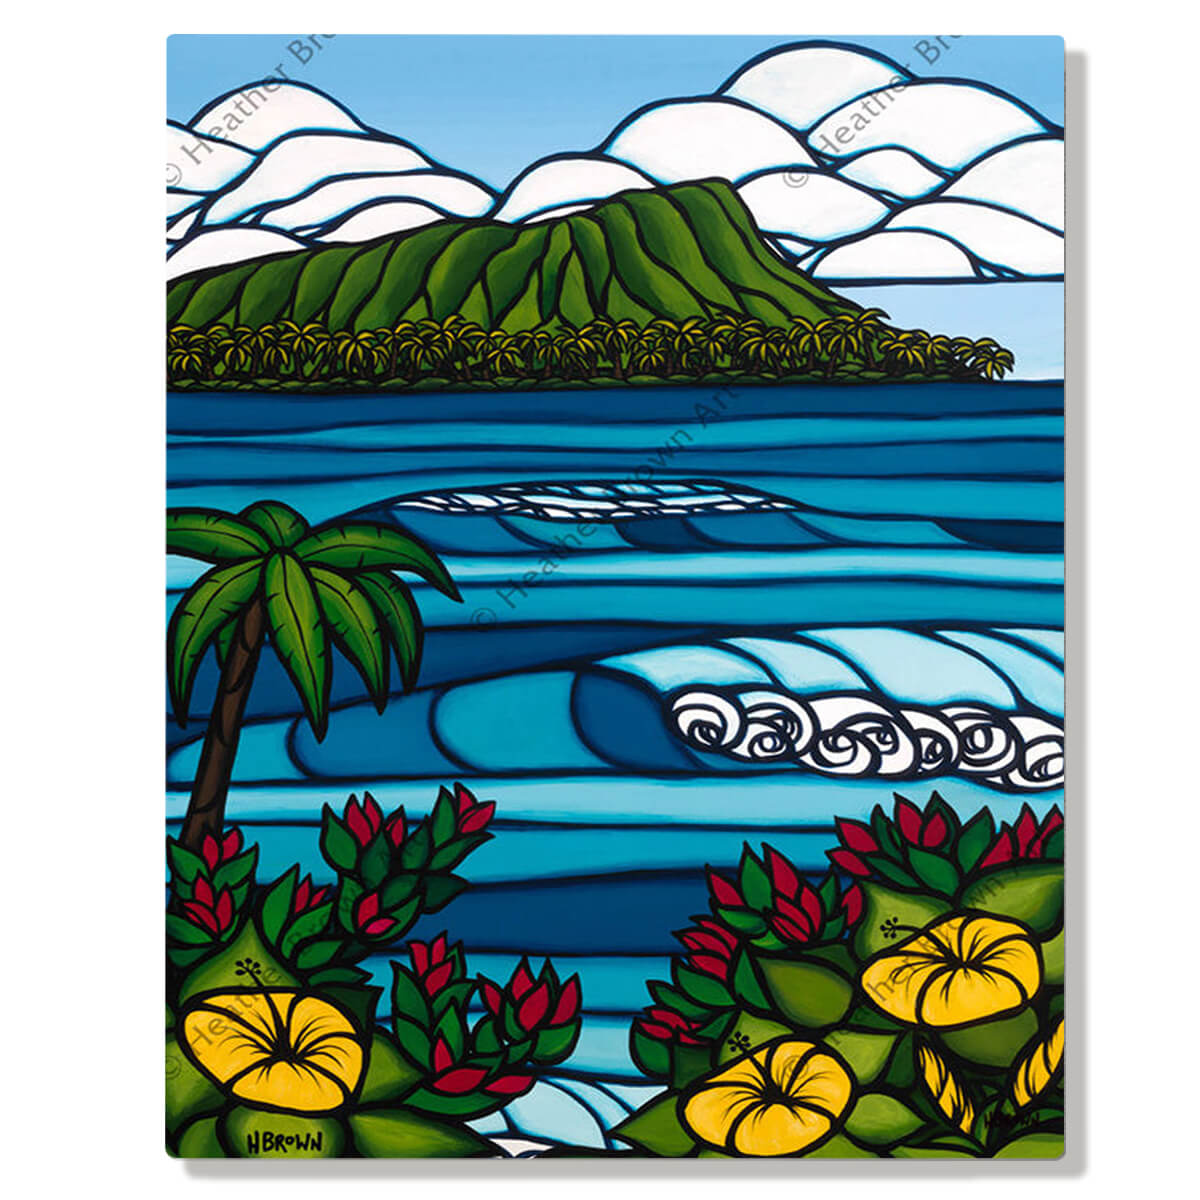 A metal art print featuring a classic view of Diamond Head Crater and some tropical flowers by Hawaii surf artist Heather Brown